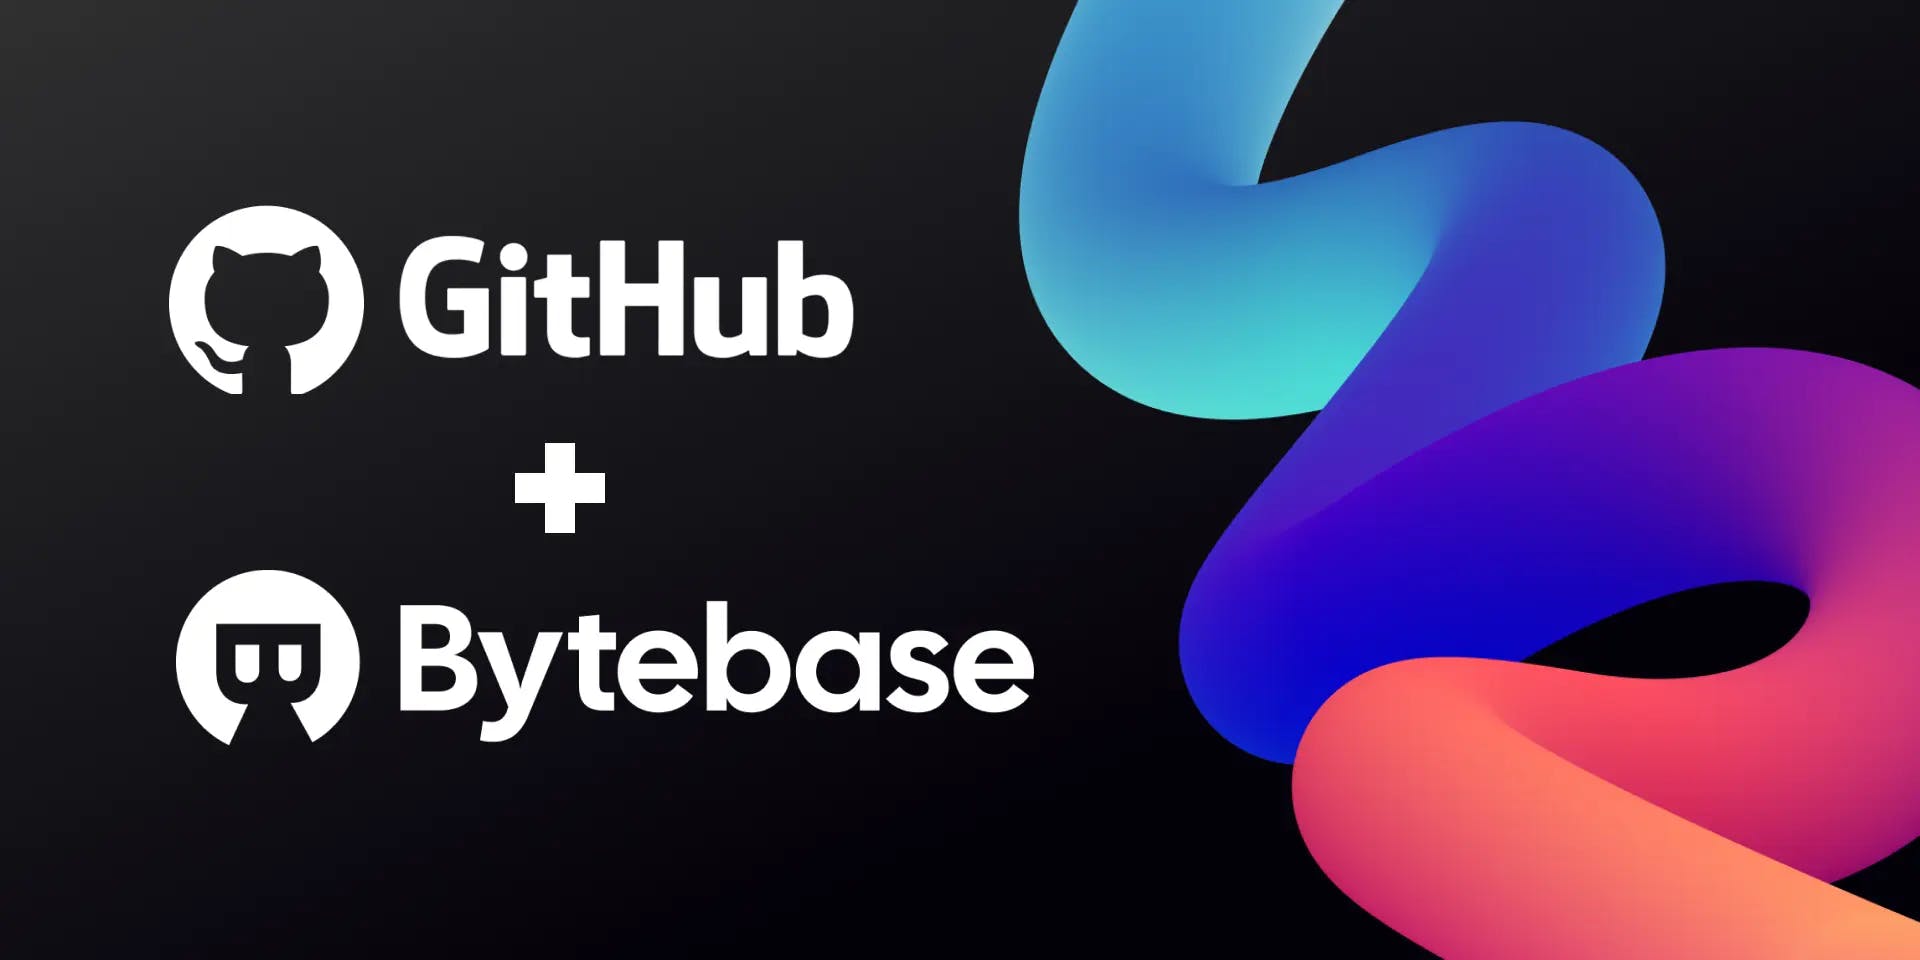 Announcing Partnership with GitHub to Automate Database Development